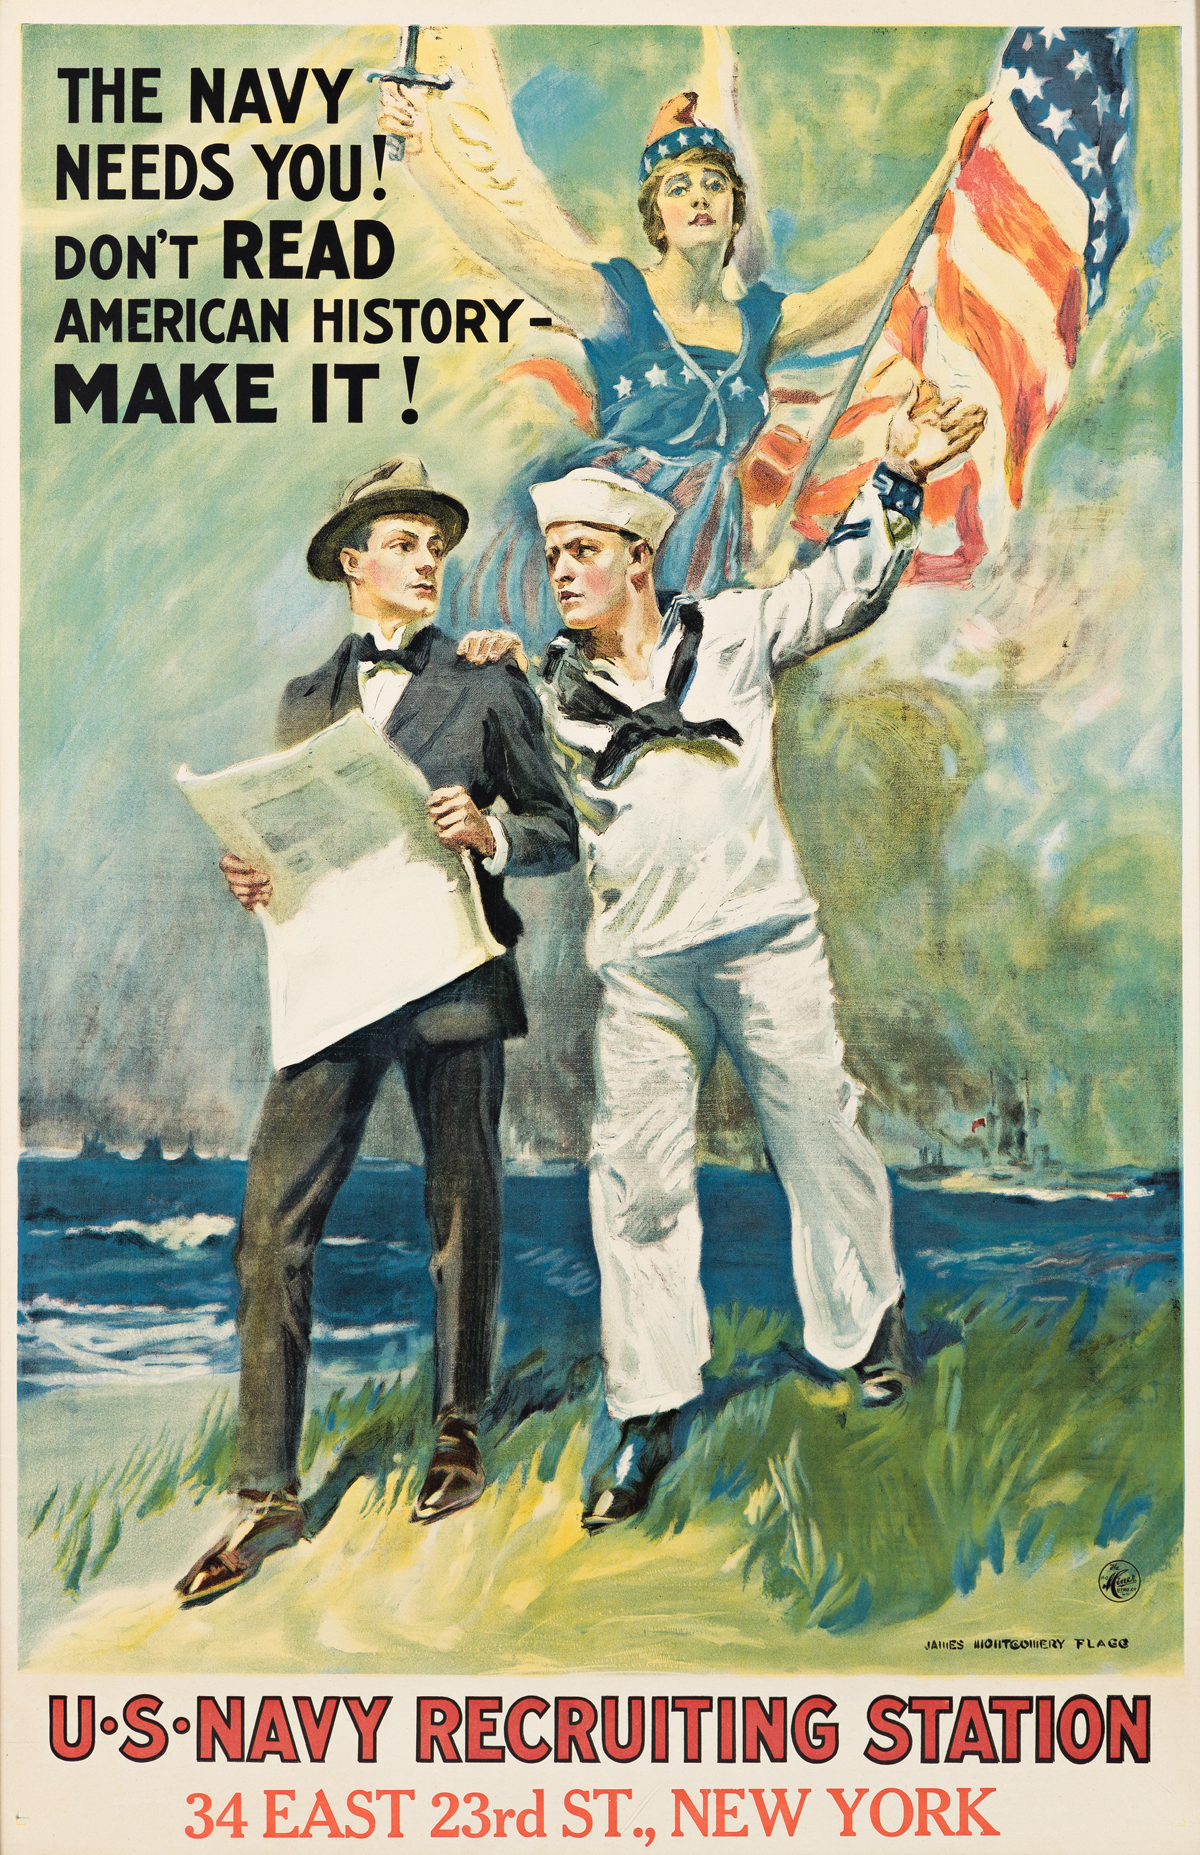 JAMES MONTGOMERY FLAGG (1870-1960).  THE NAVY NEEDS YOU! DONT READ AMERICAN HISTORY - MAKE IT! 1917. 41¼x27 inches, 104¾x68½ cm. The H